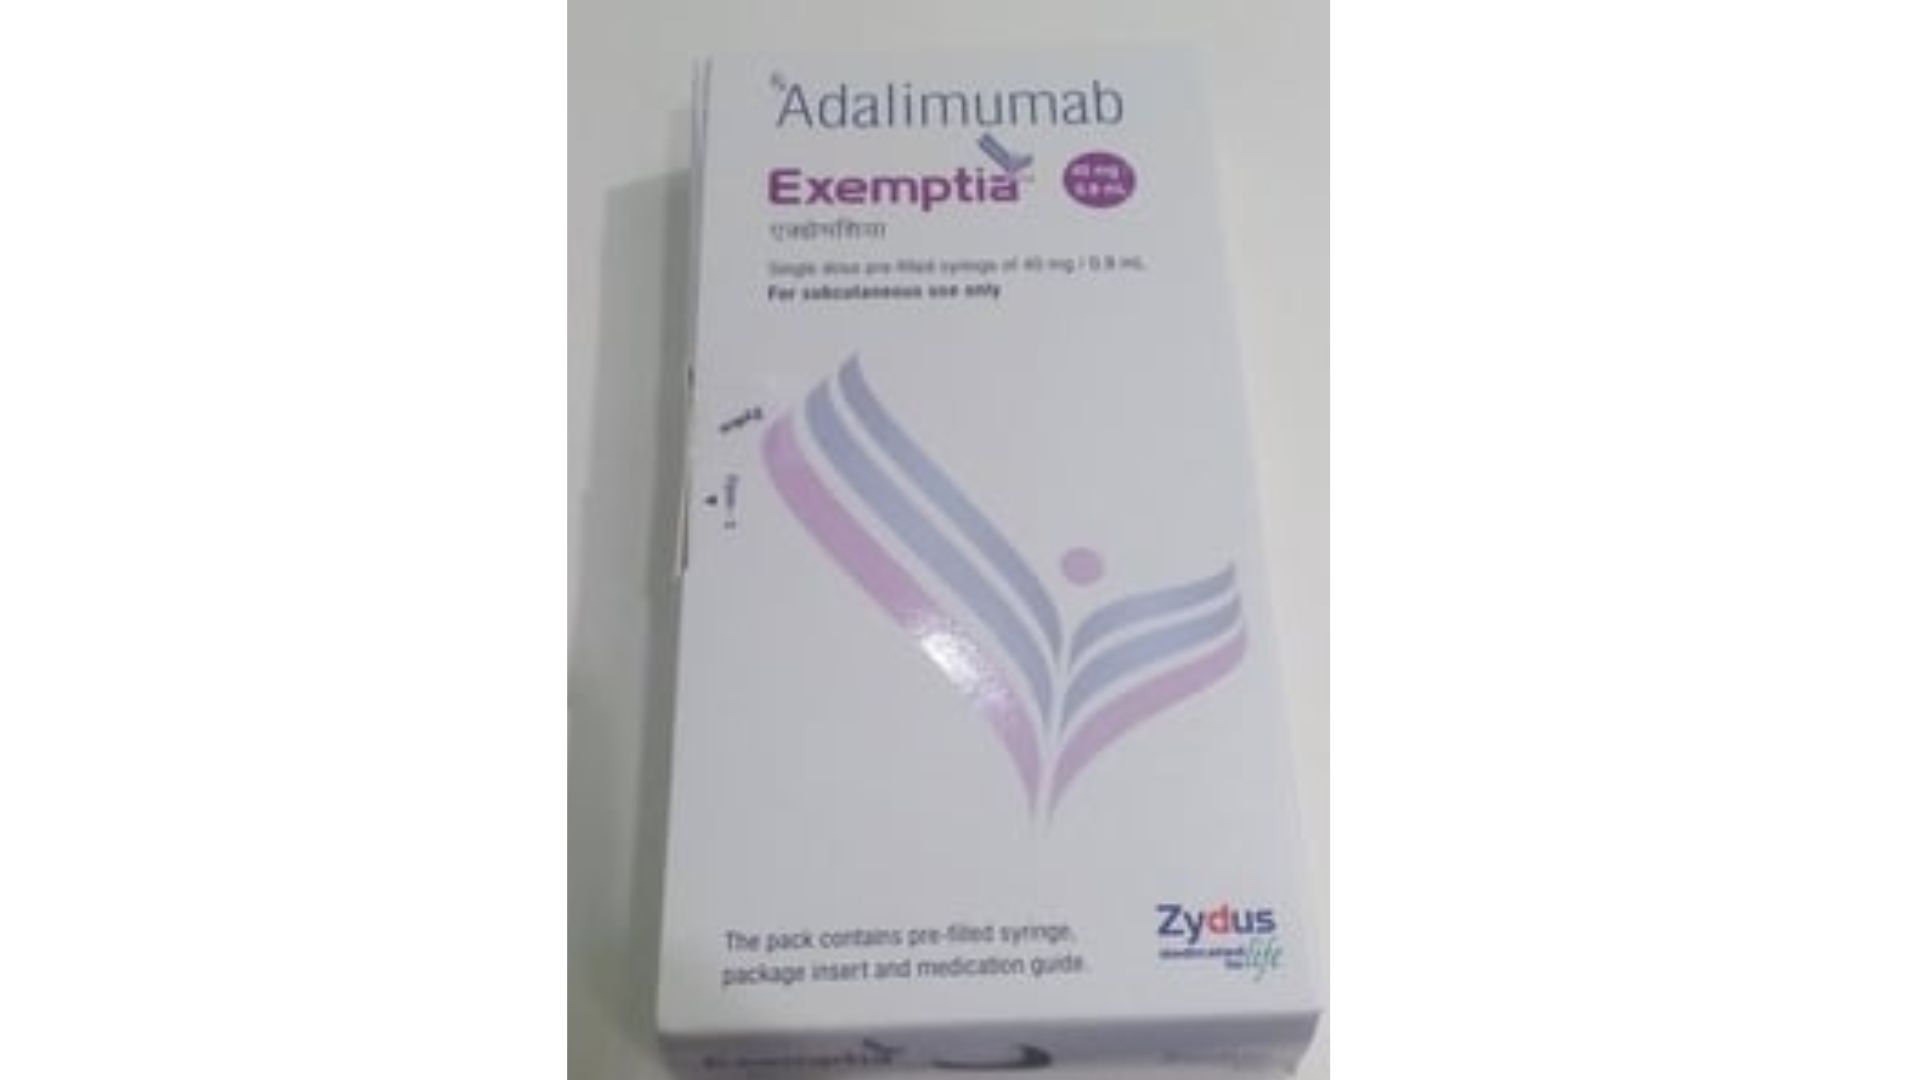 Adalimumab 40mg Injection (Exemptia) UP To 41% Off